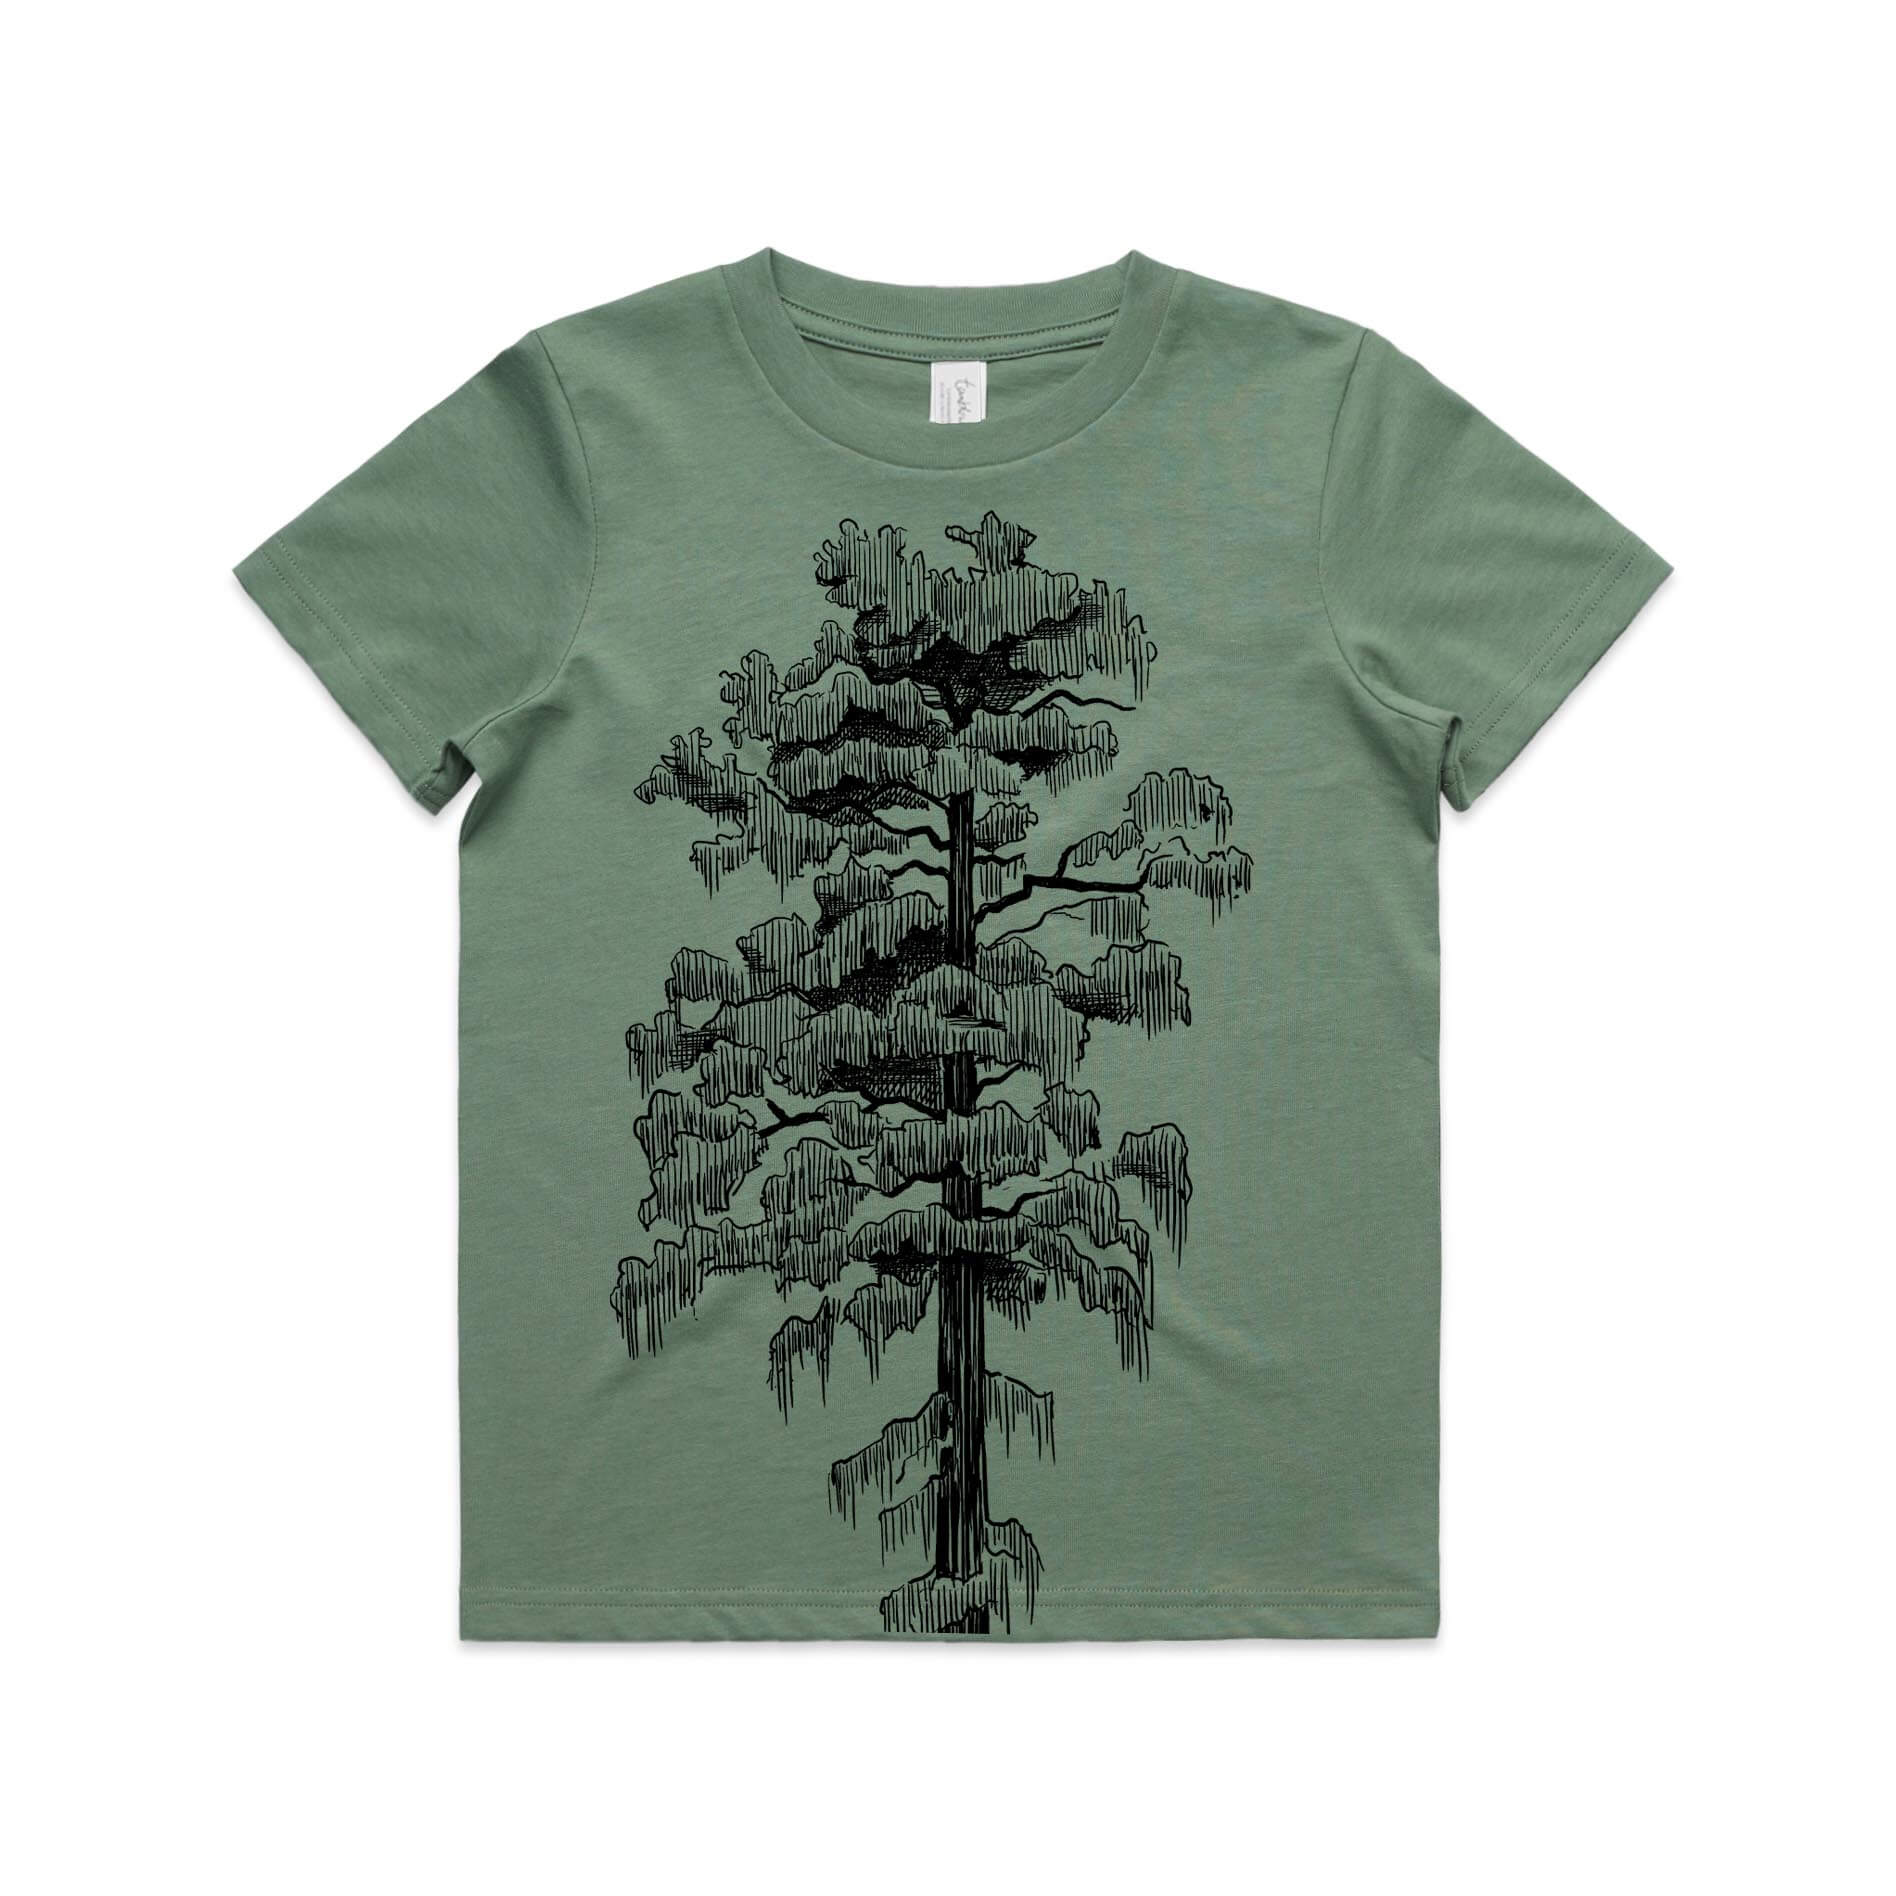 Sage, cotton kids' t-shirt with screen printed rimu design.